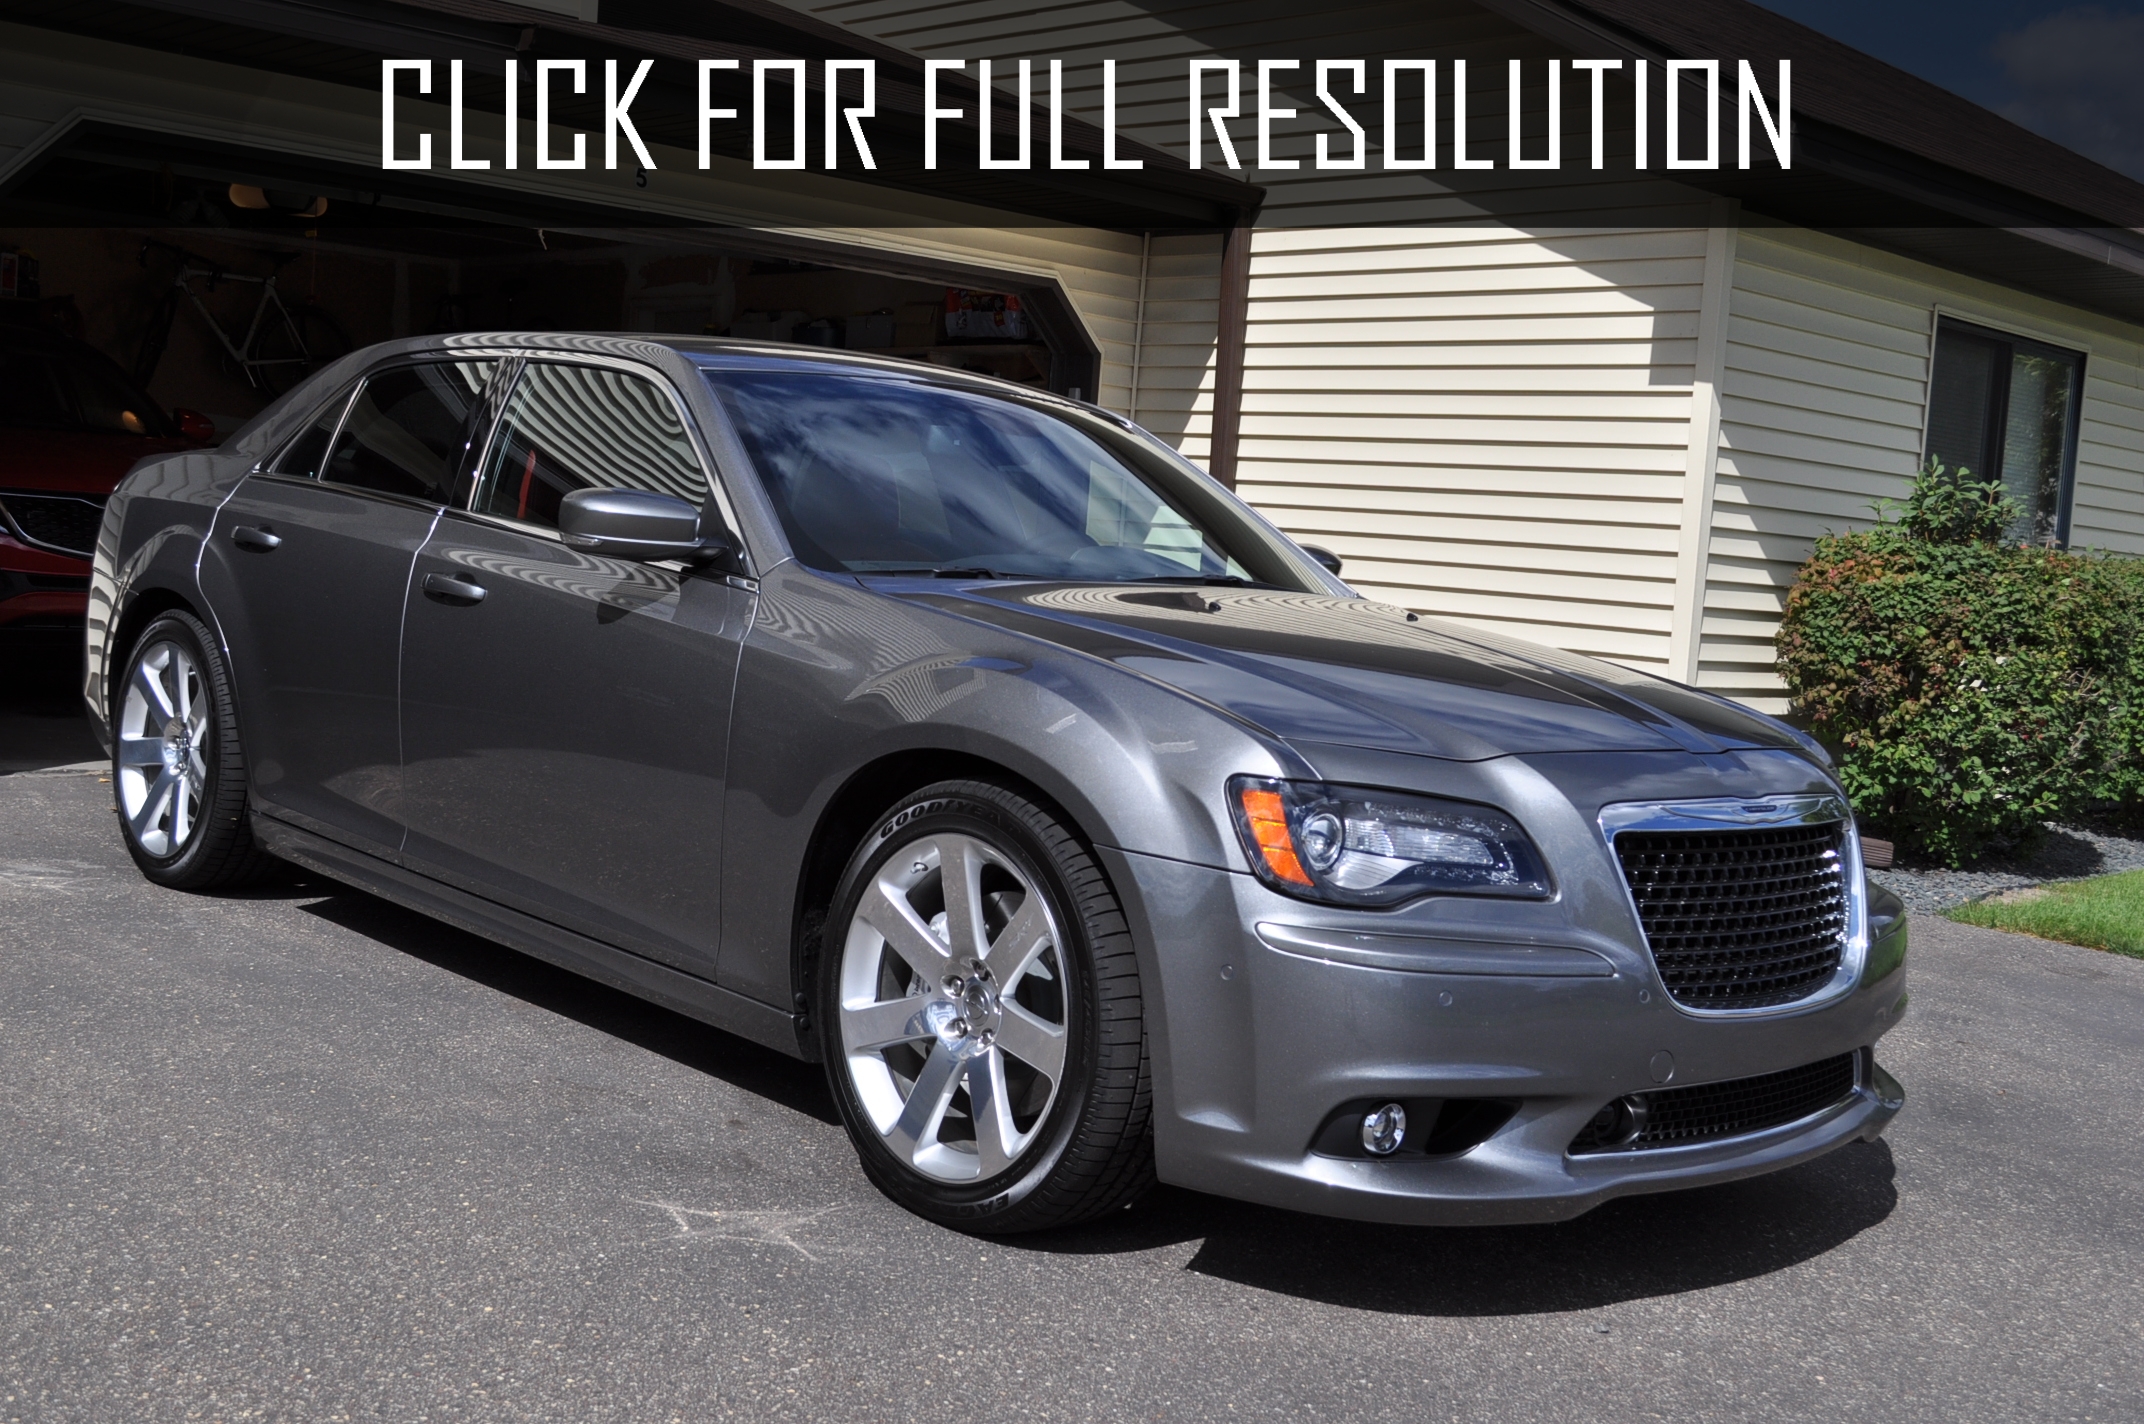 2004 Chrysler 300 Srt8 news, reviews, msrp, ratings with